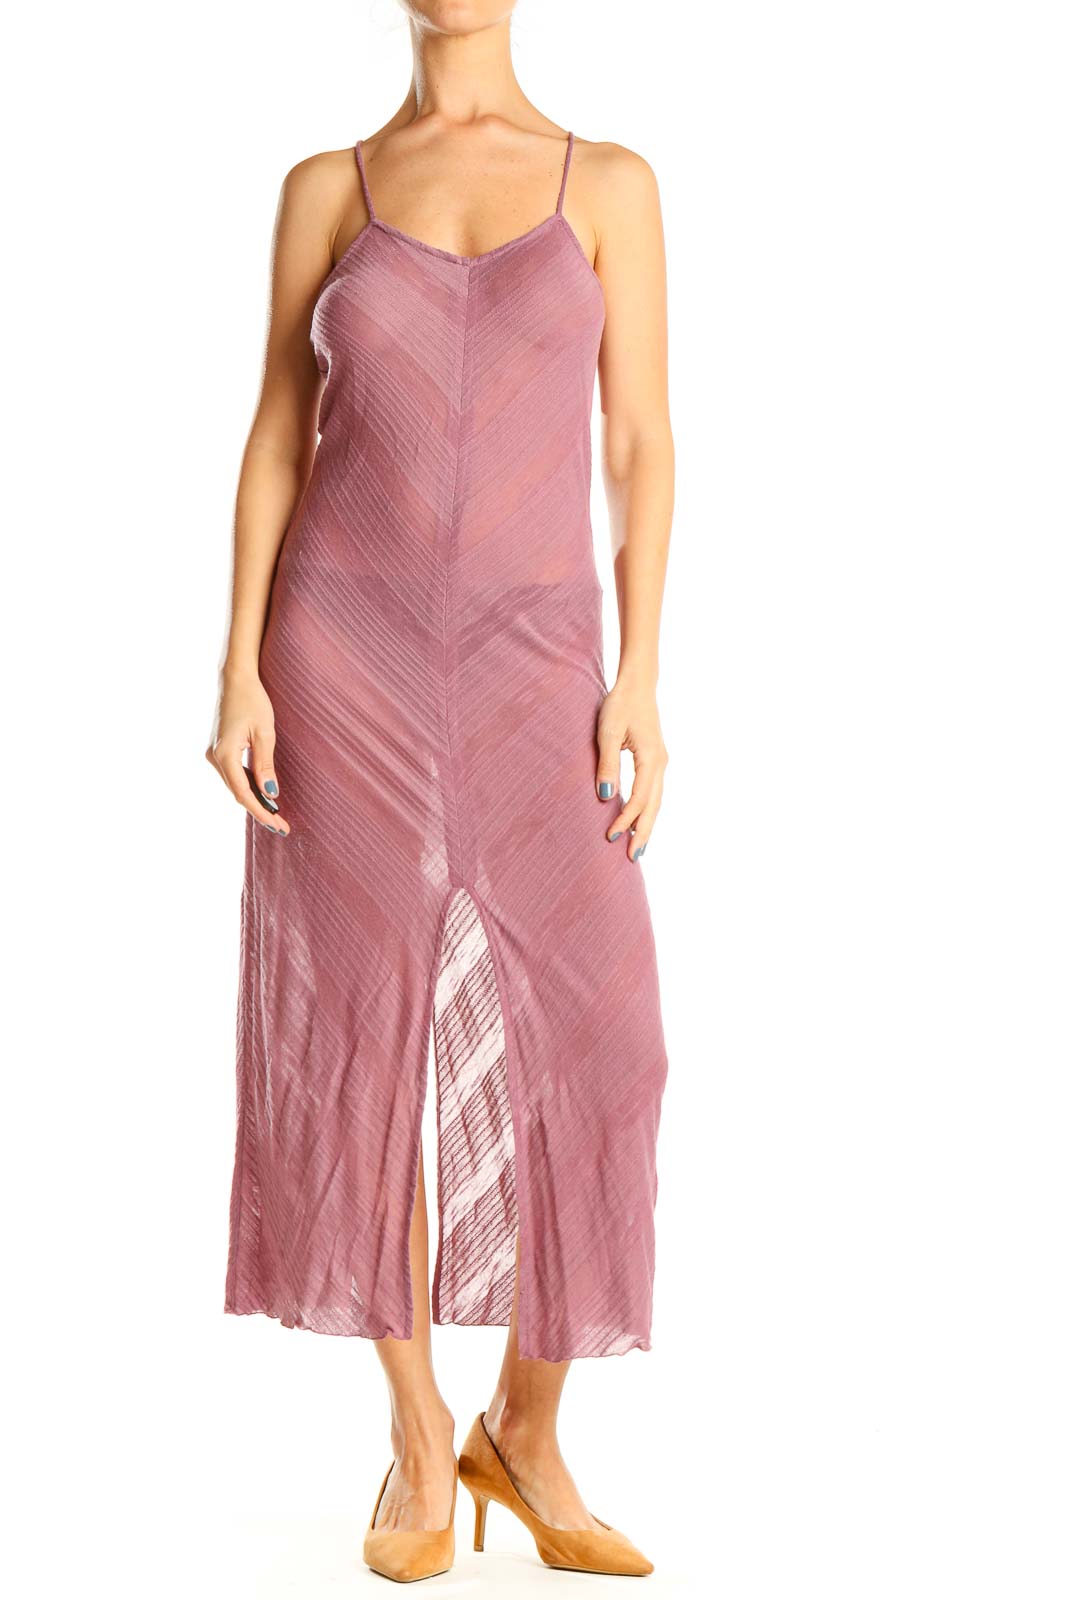 Pink Textured Bohemian Beach Cover-Up Dress Front